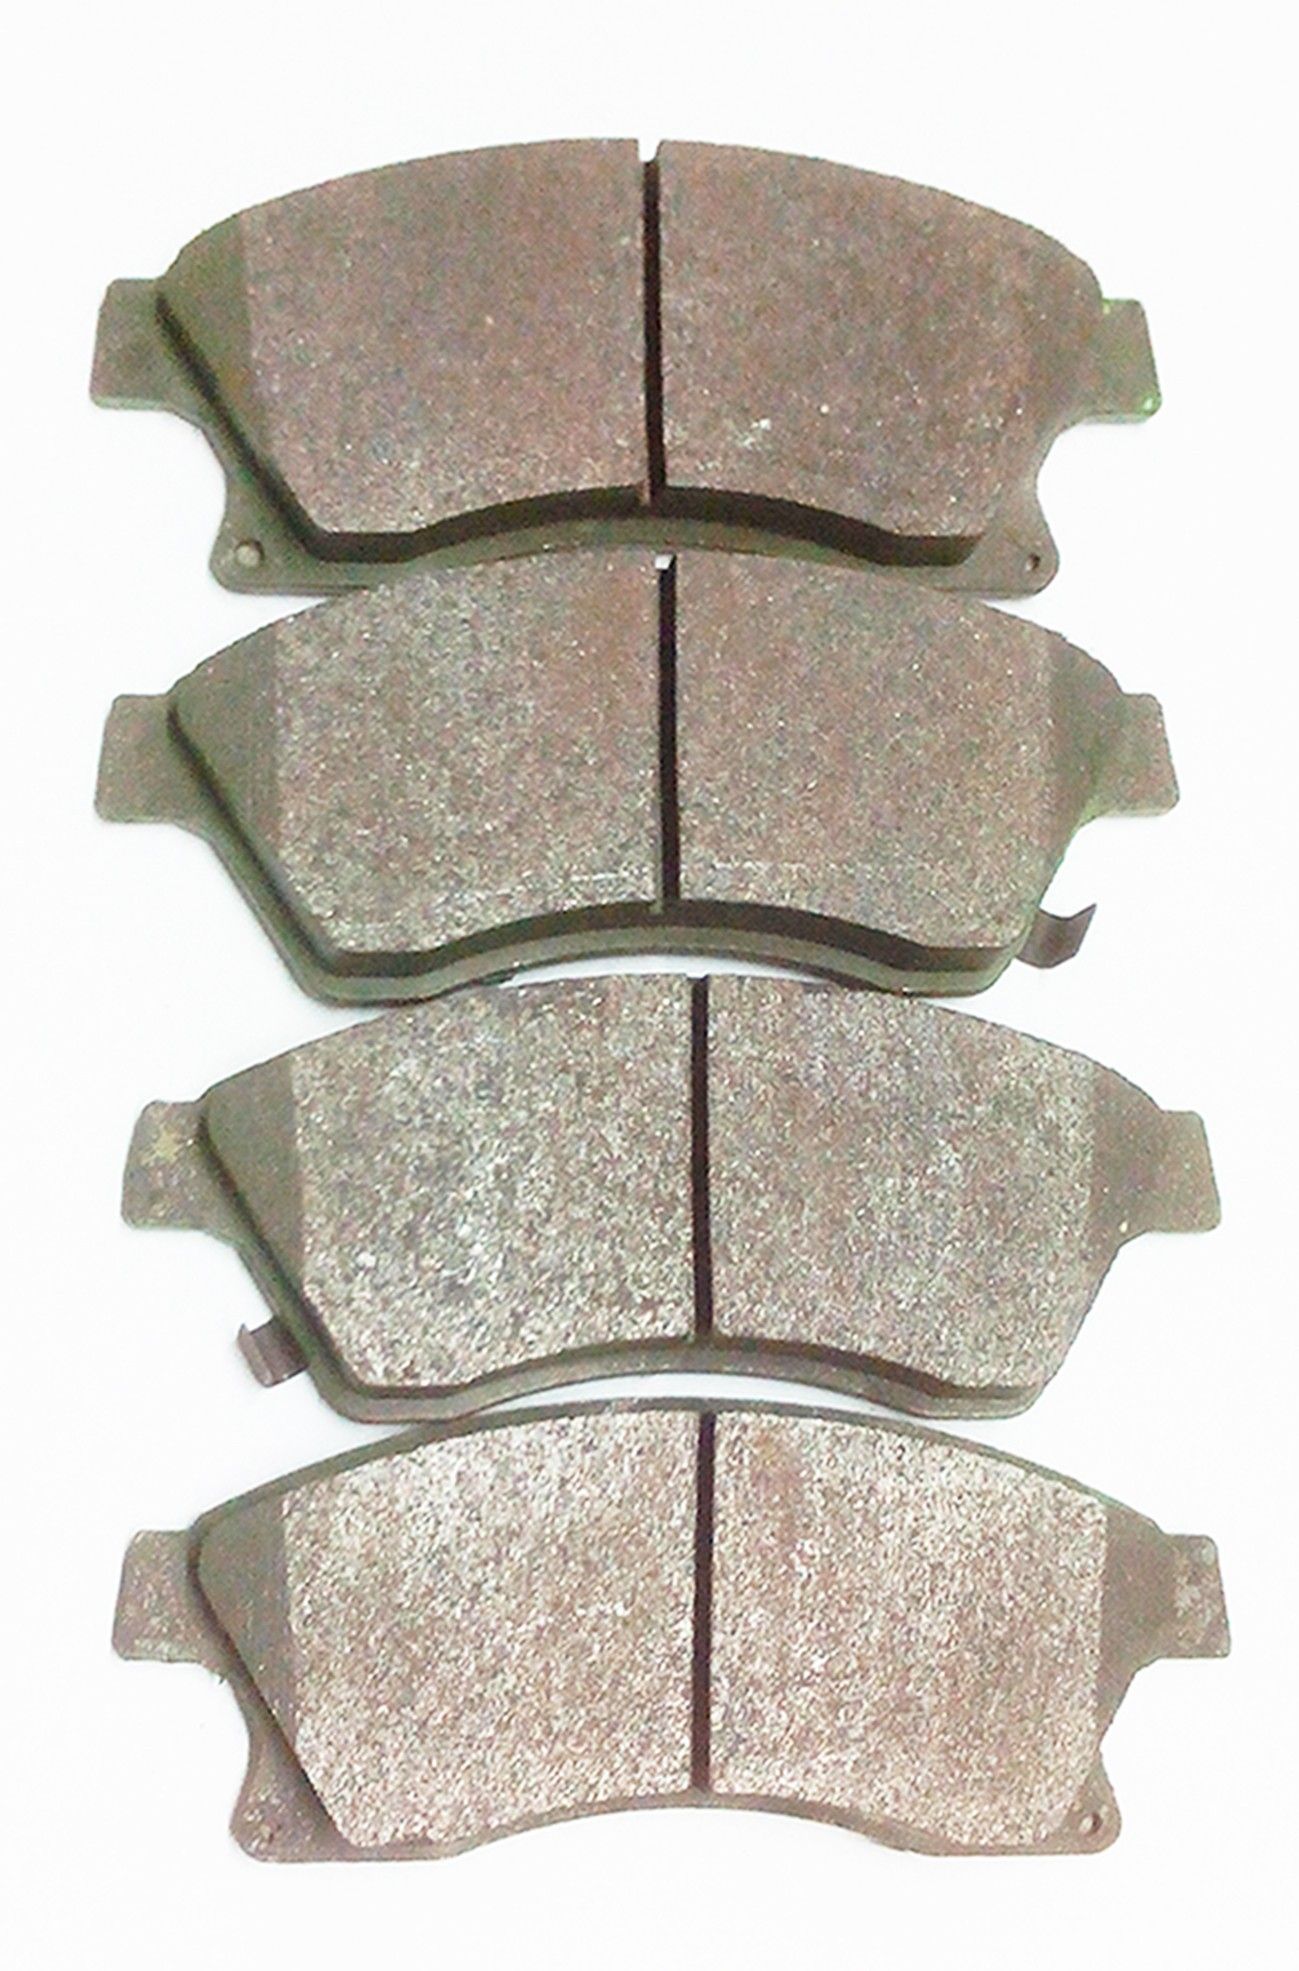 Brake Pads for Datsun Go. Set of 4. Brand new in a box. Asbestos